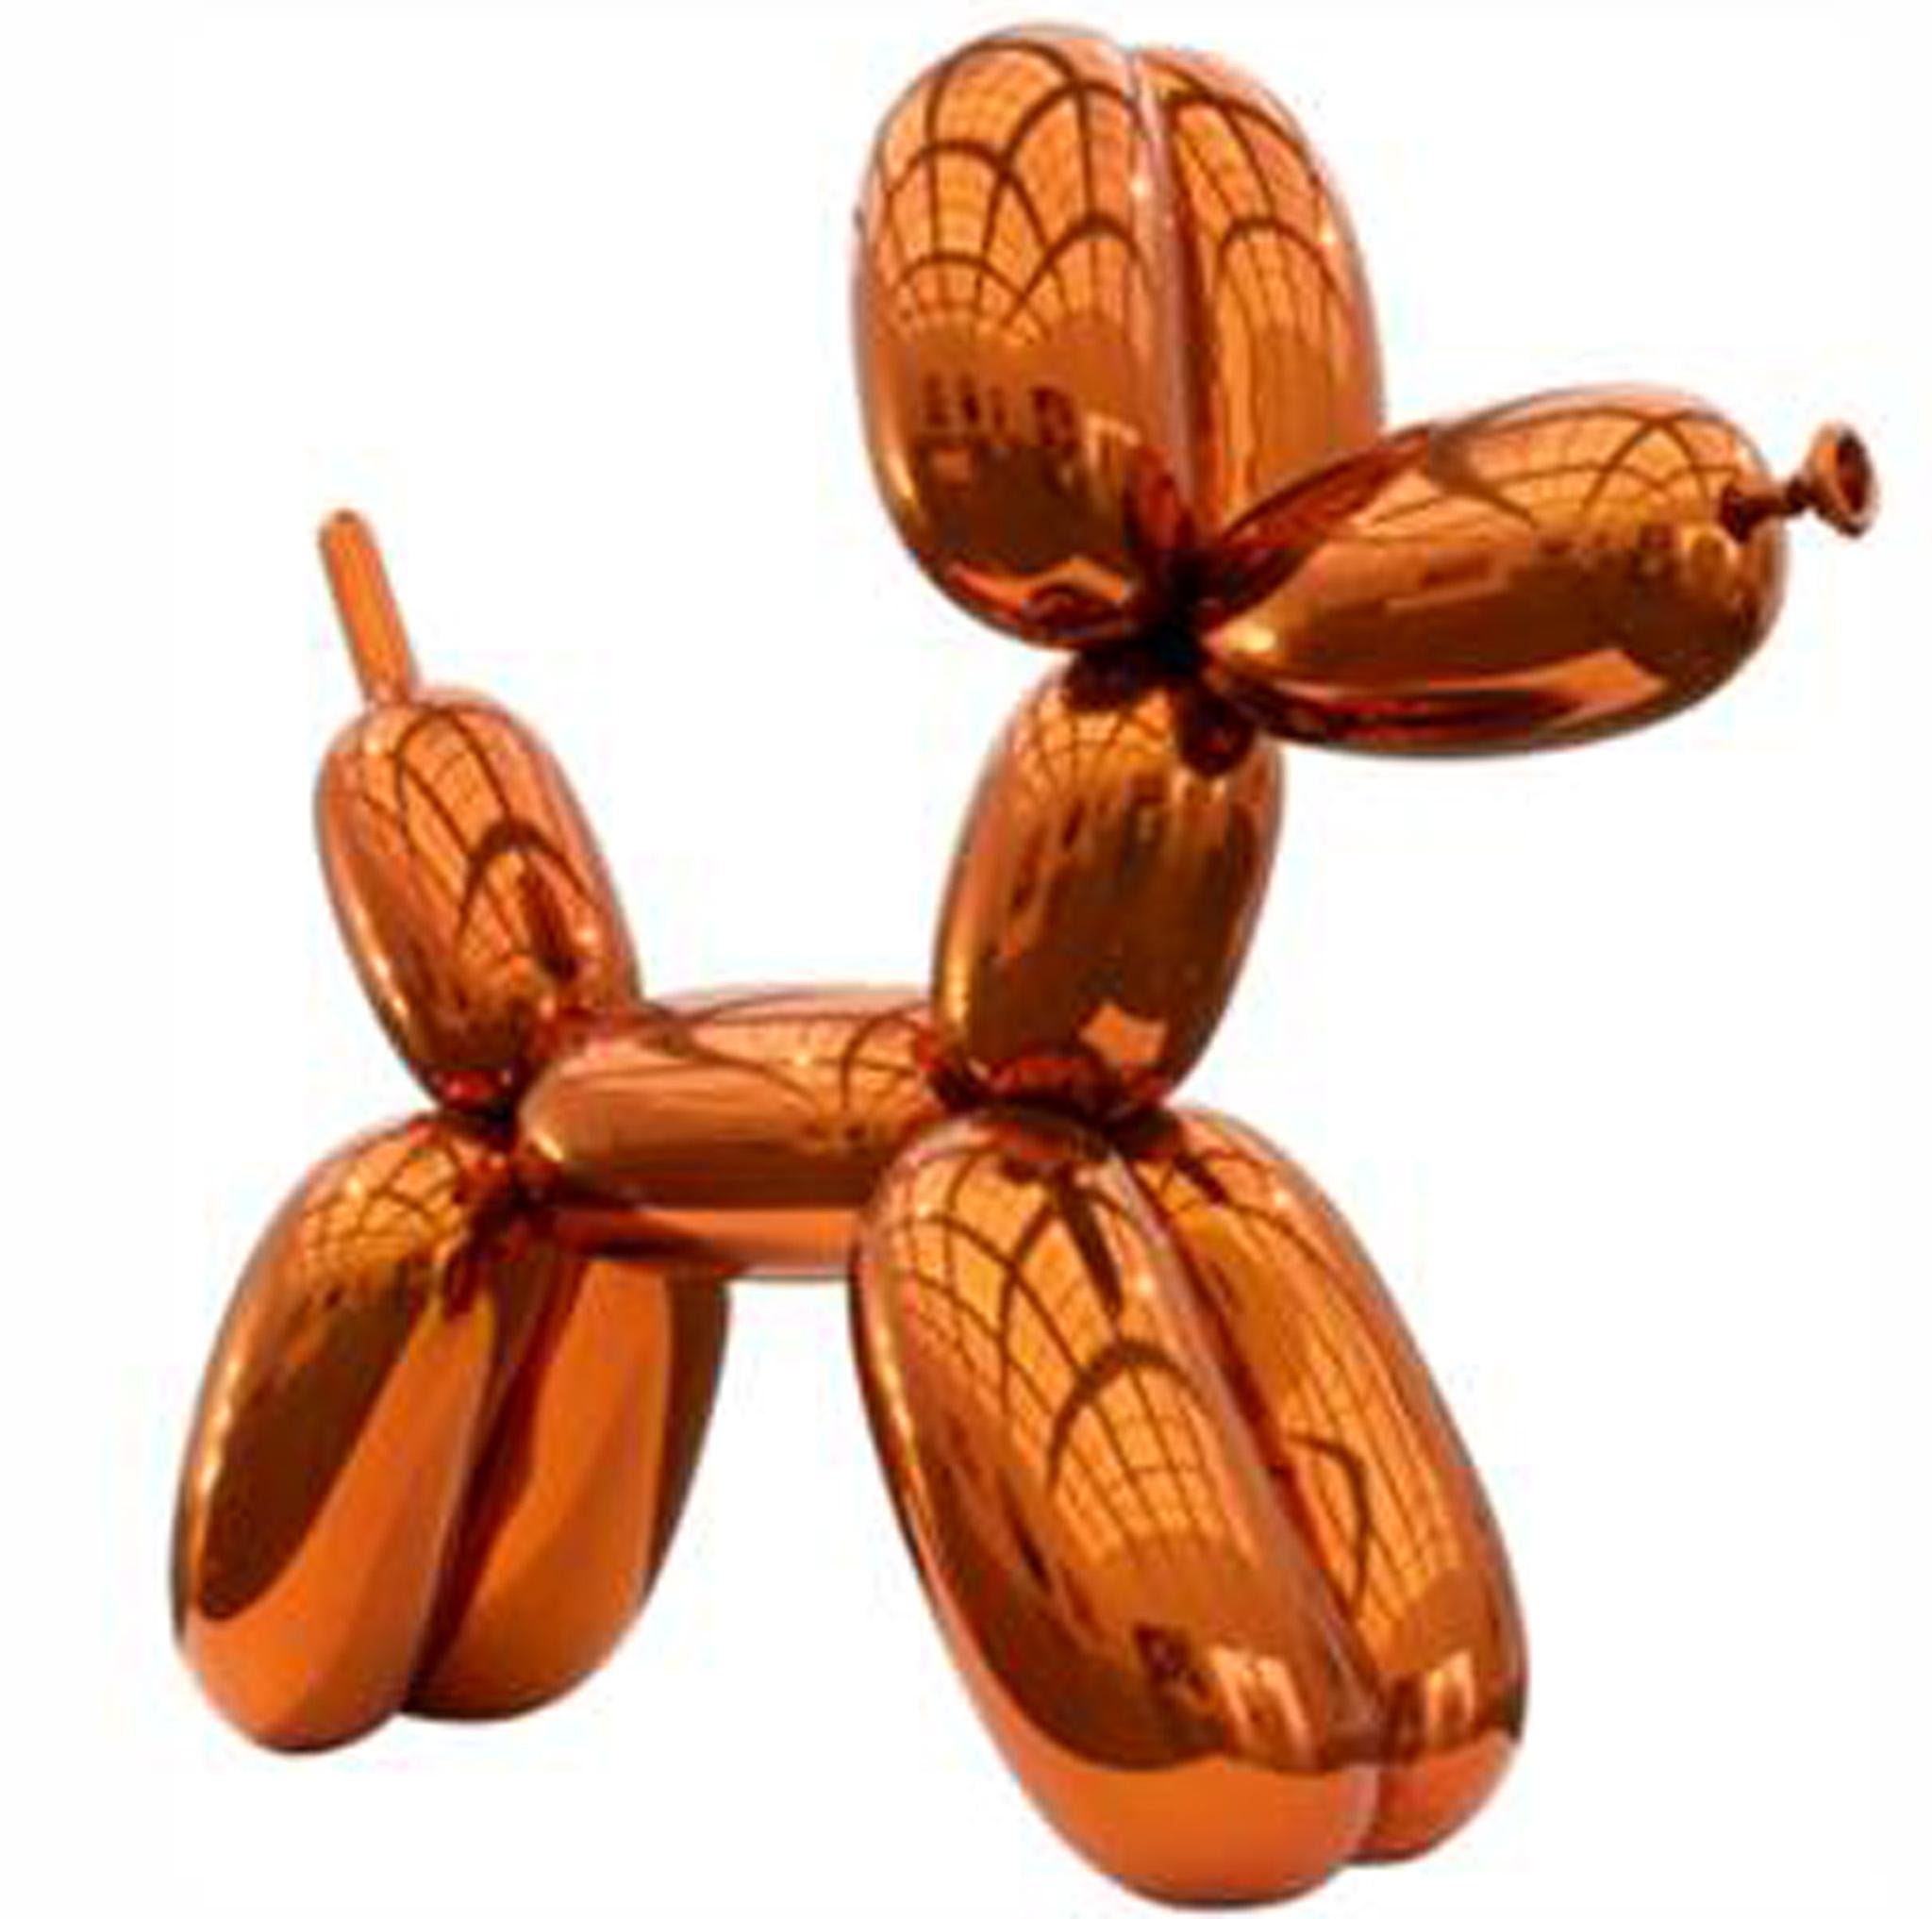 Koons is known for works including ‘Balloon Dog’ which sold for $58.4m at auction (Christies)